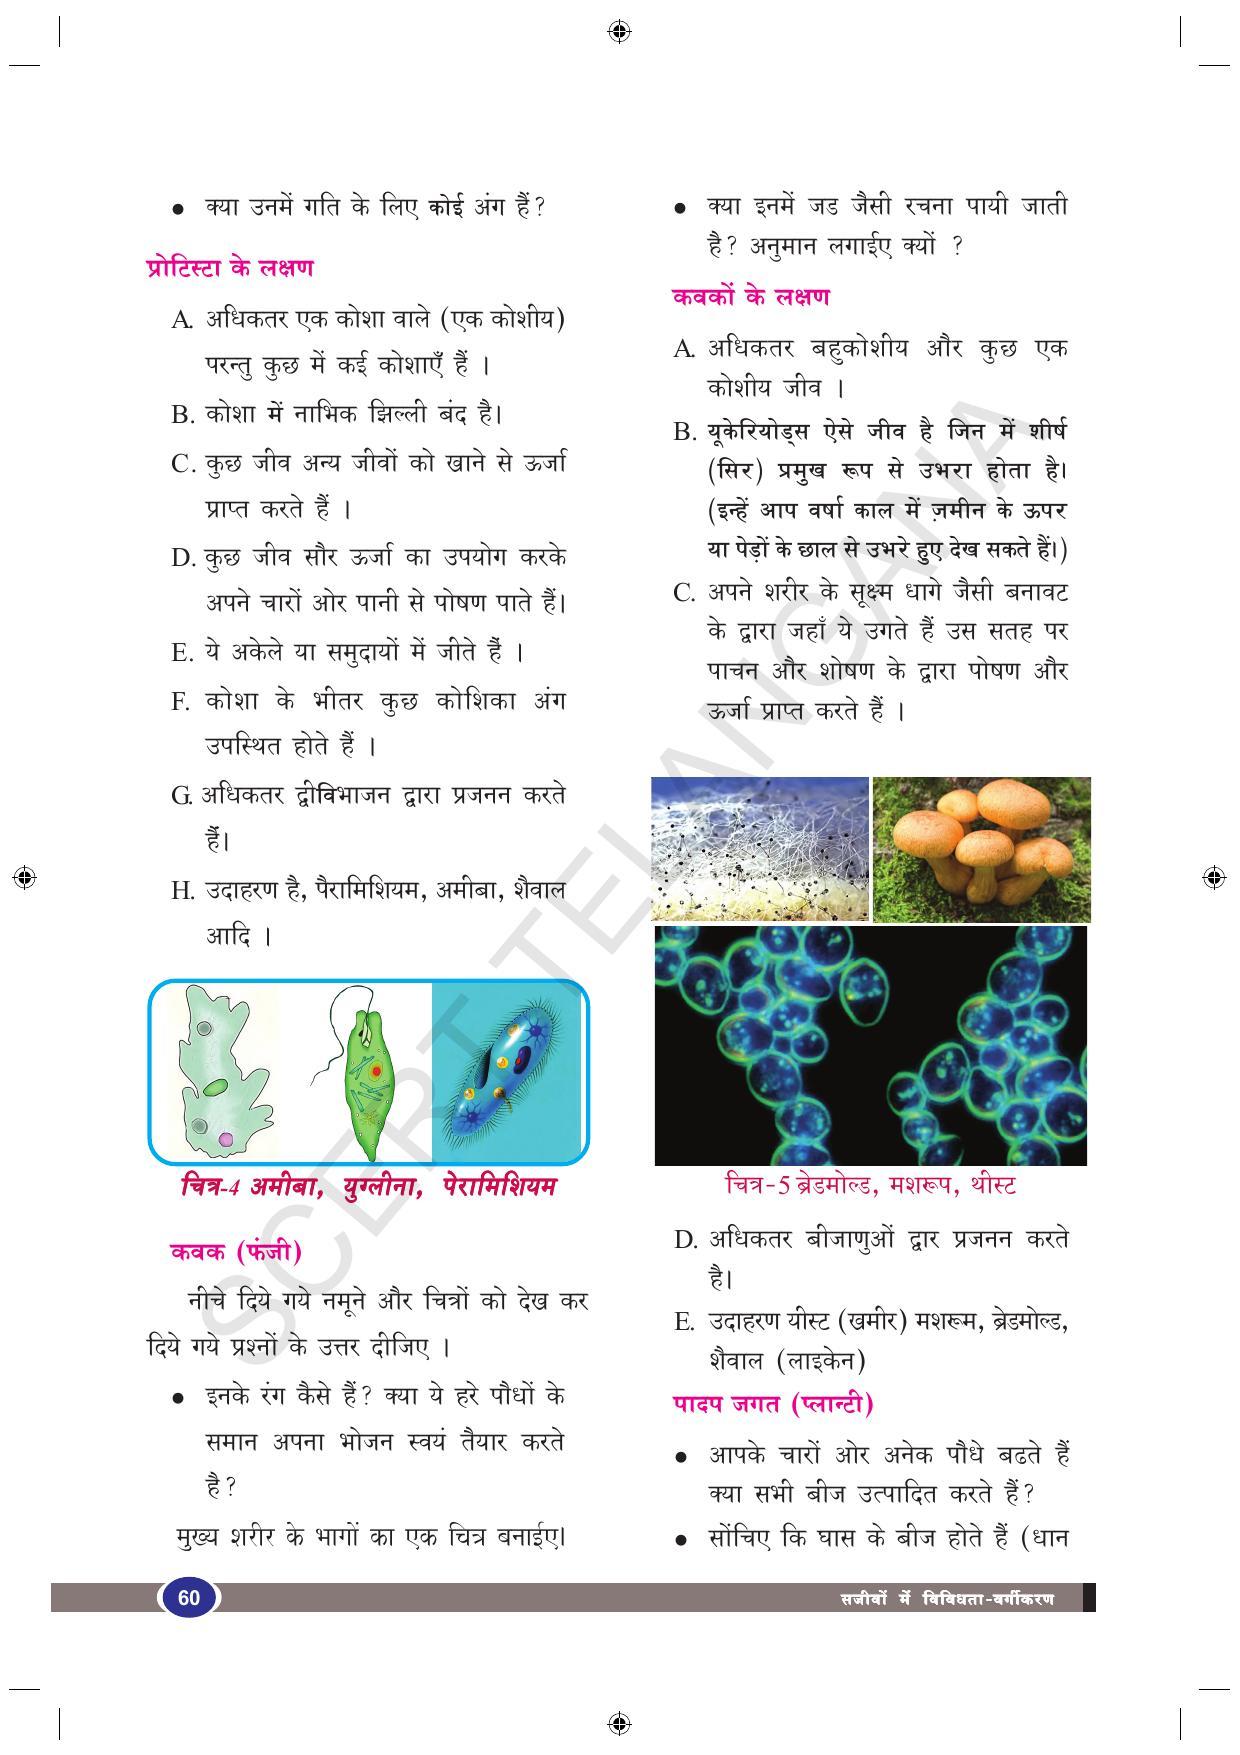 TS SCERT Class 9 Biological Science (Hindi Medium) Text Book - Page 72